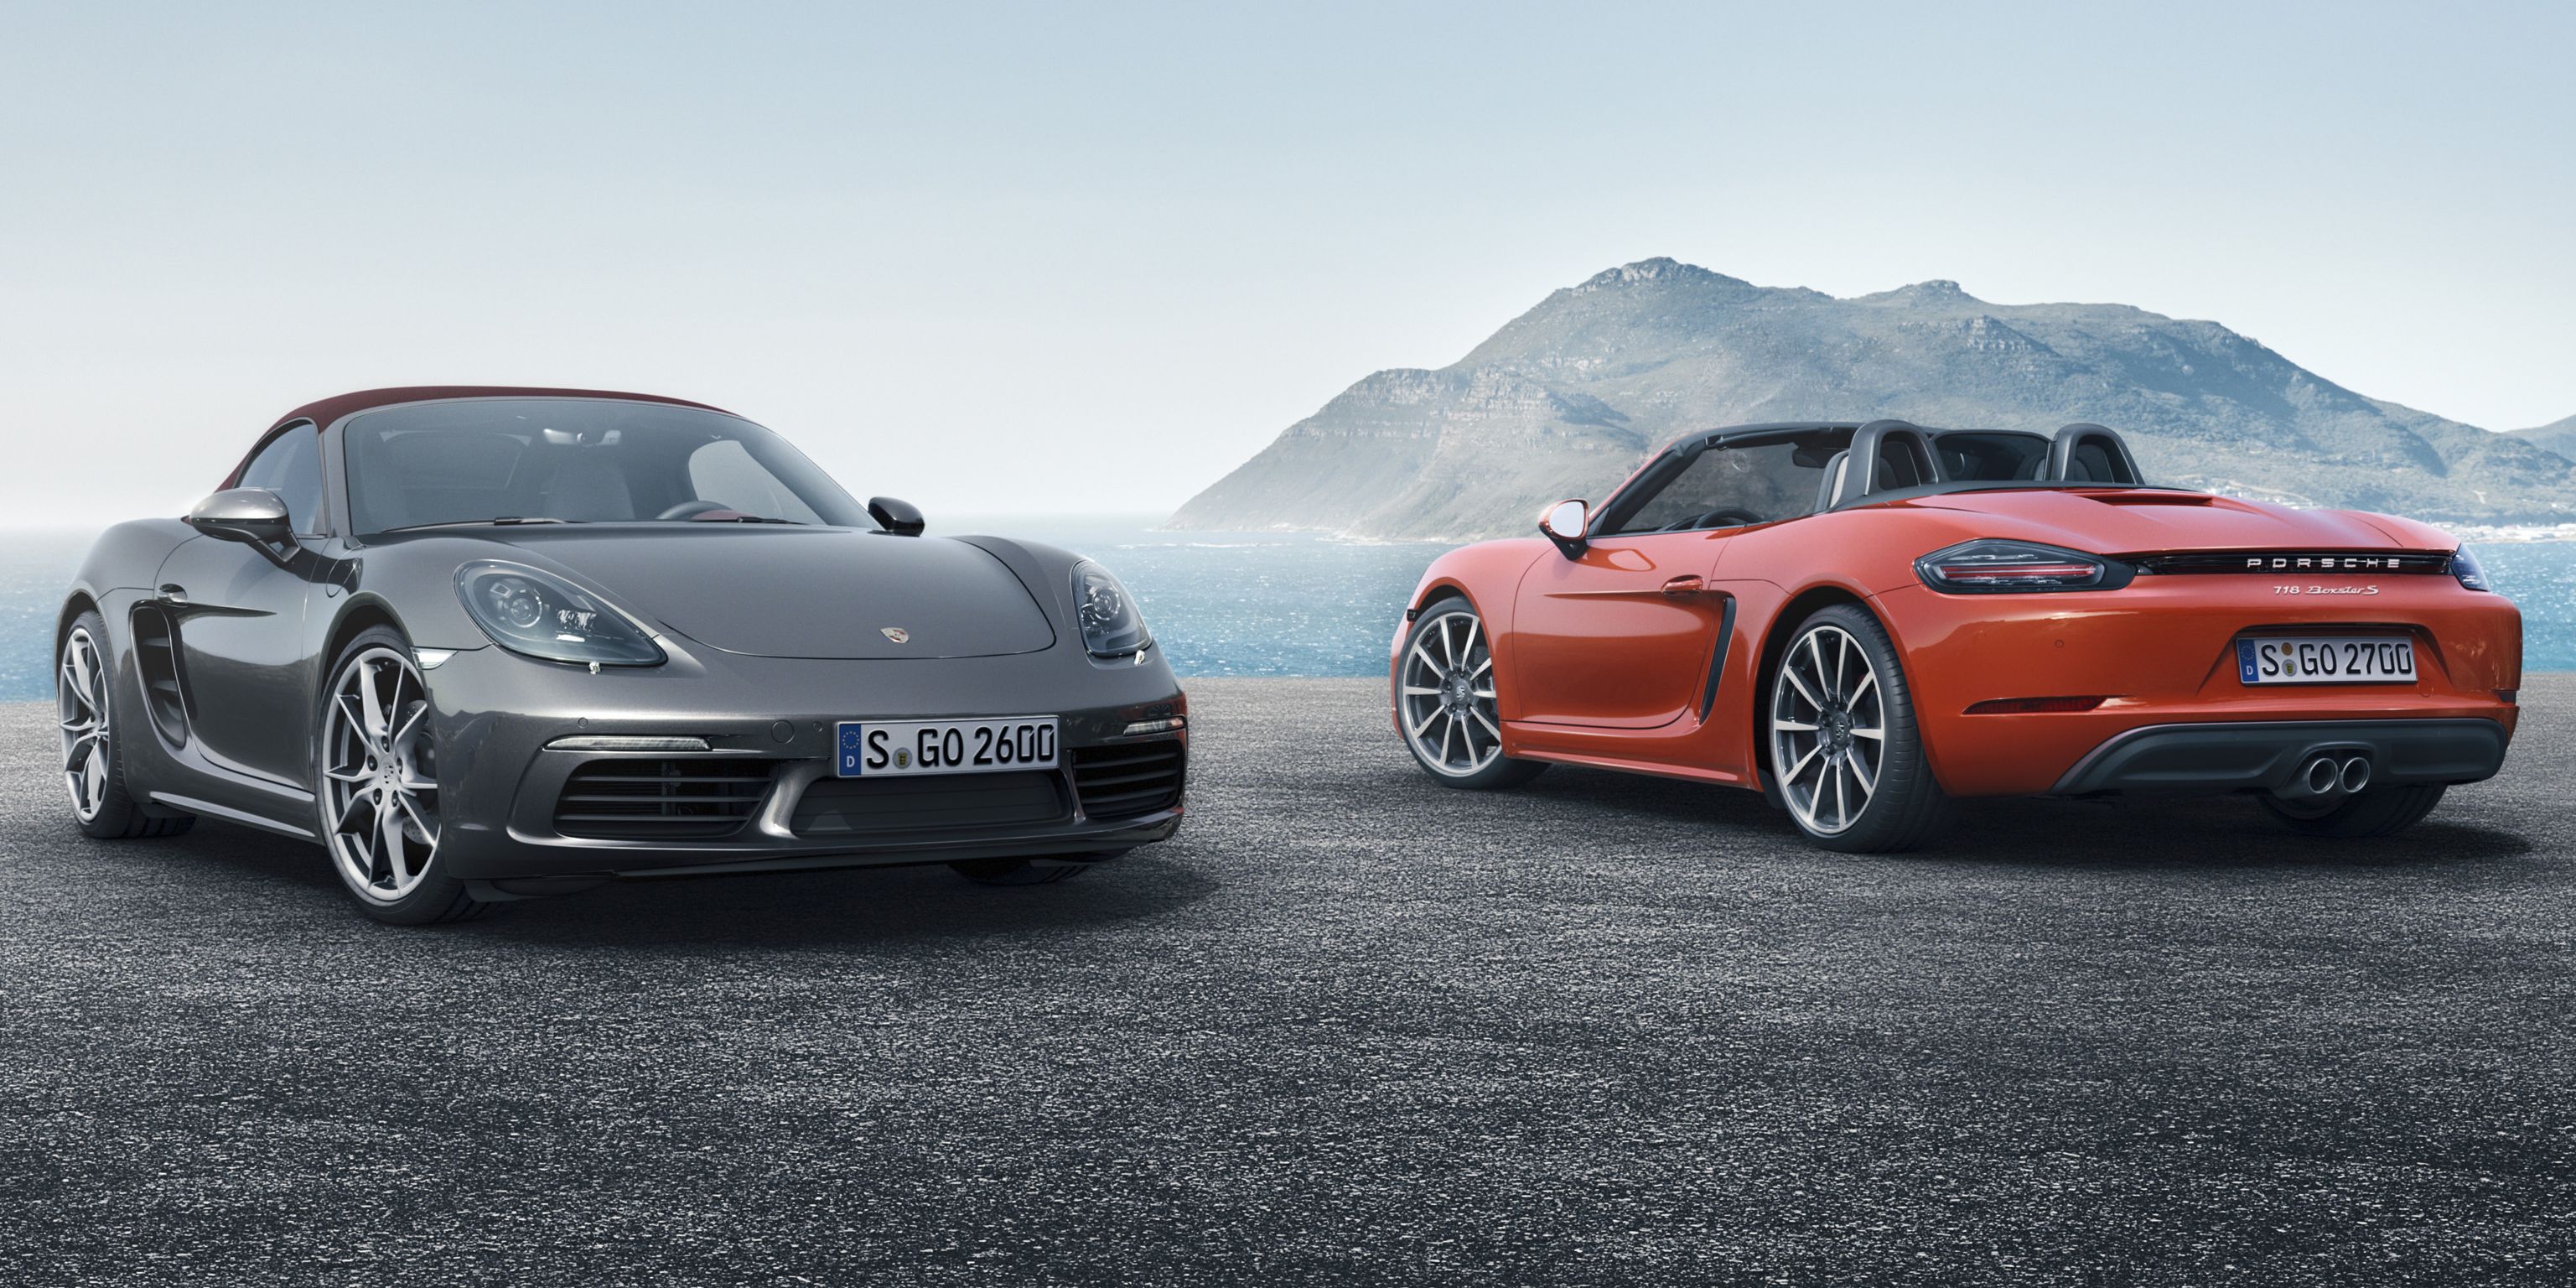 2017 Porsche 718 Boxster and Boxster S: Here They Are, Officially